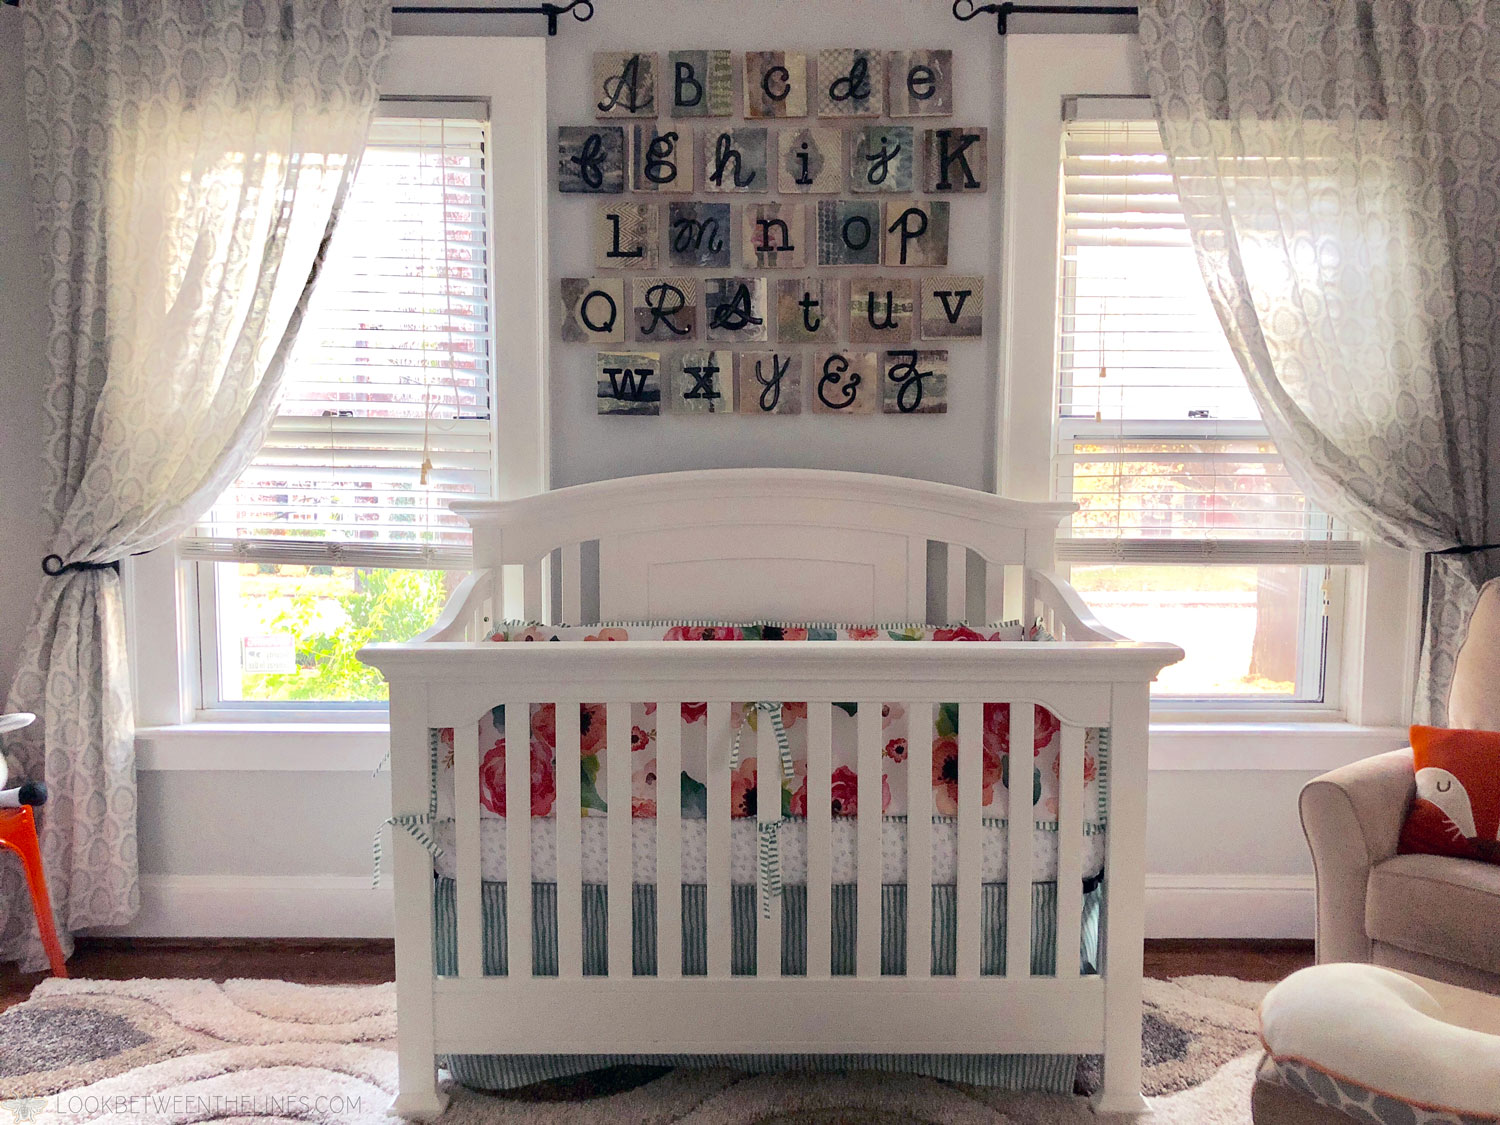 Baby girl's crib with a floral pattern bumper, bright windows, and the ABC's hanging on the wall.